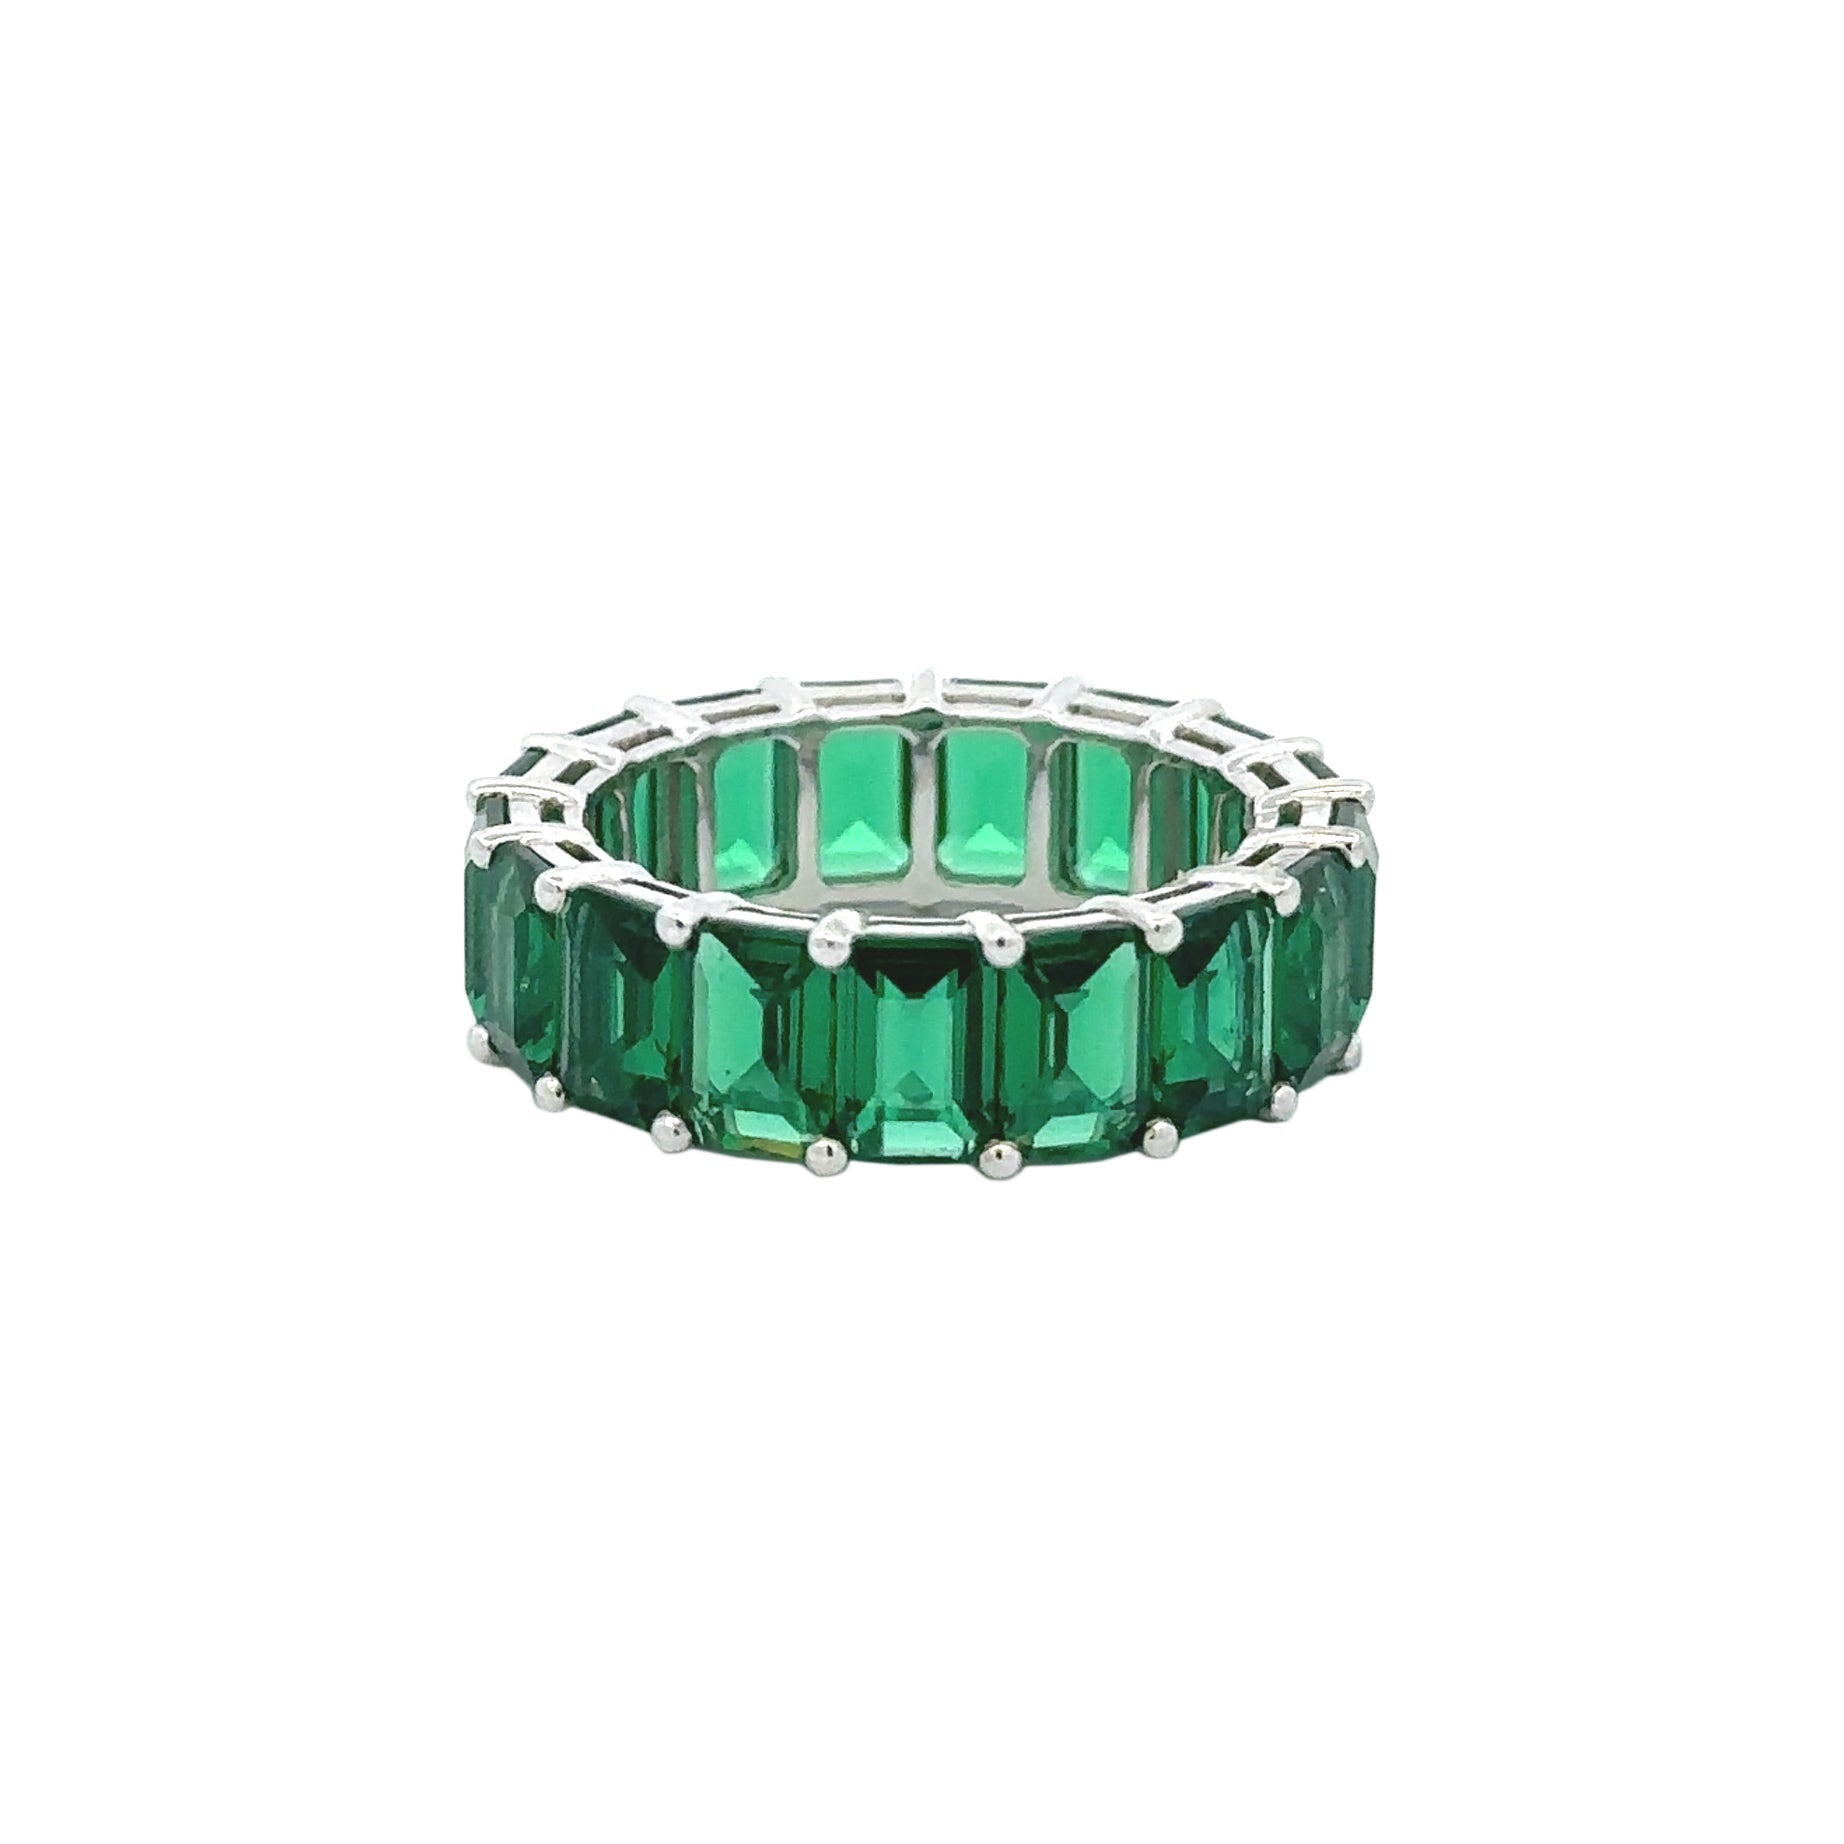 Gemma Couture Green Quartz Eternity Band - Be On Park